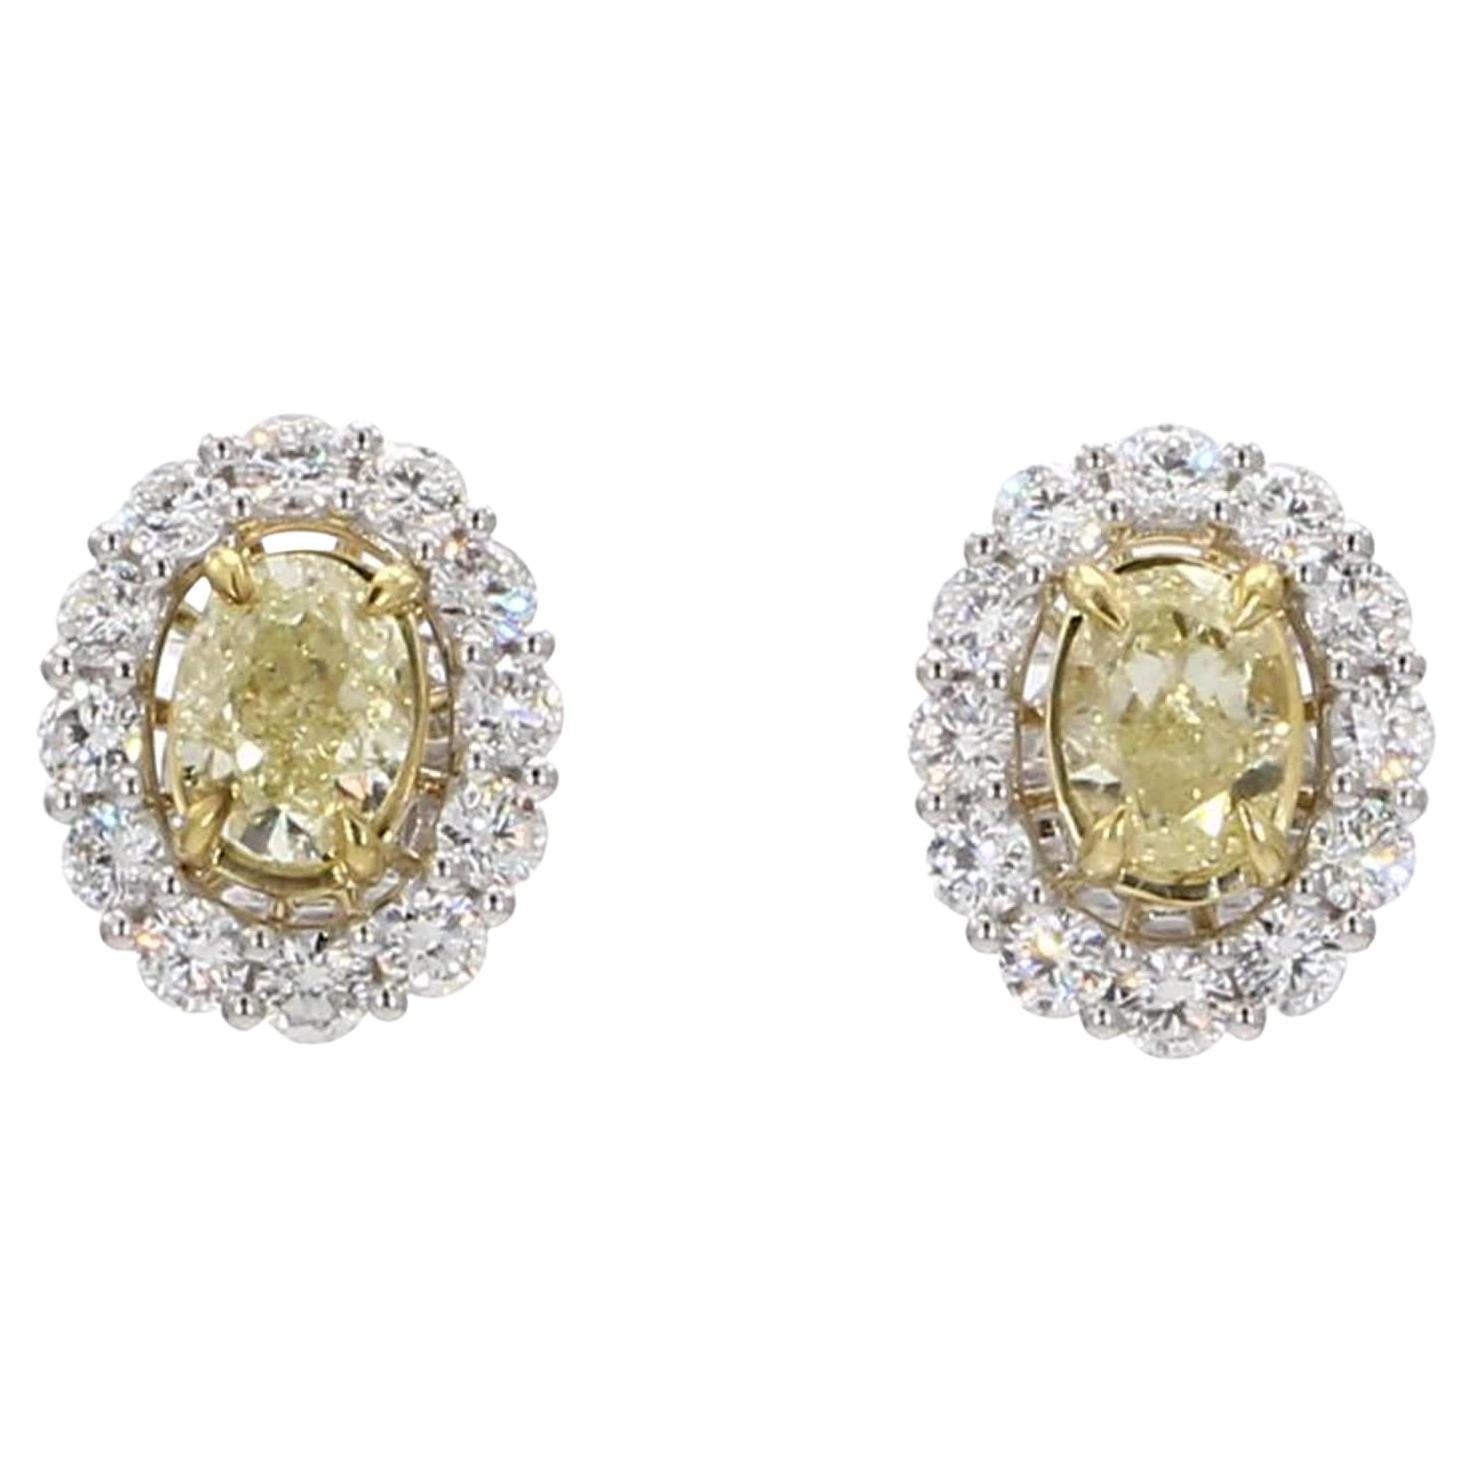 Natural Yellow Oval and White Diamond 2.67 Carat TW Gold Stud Earrings